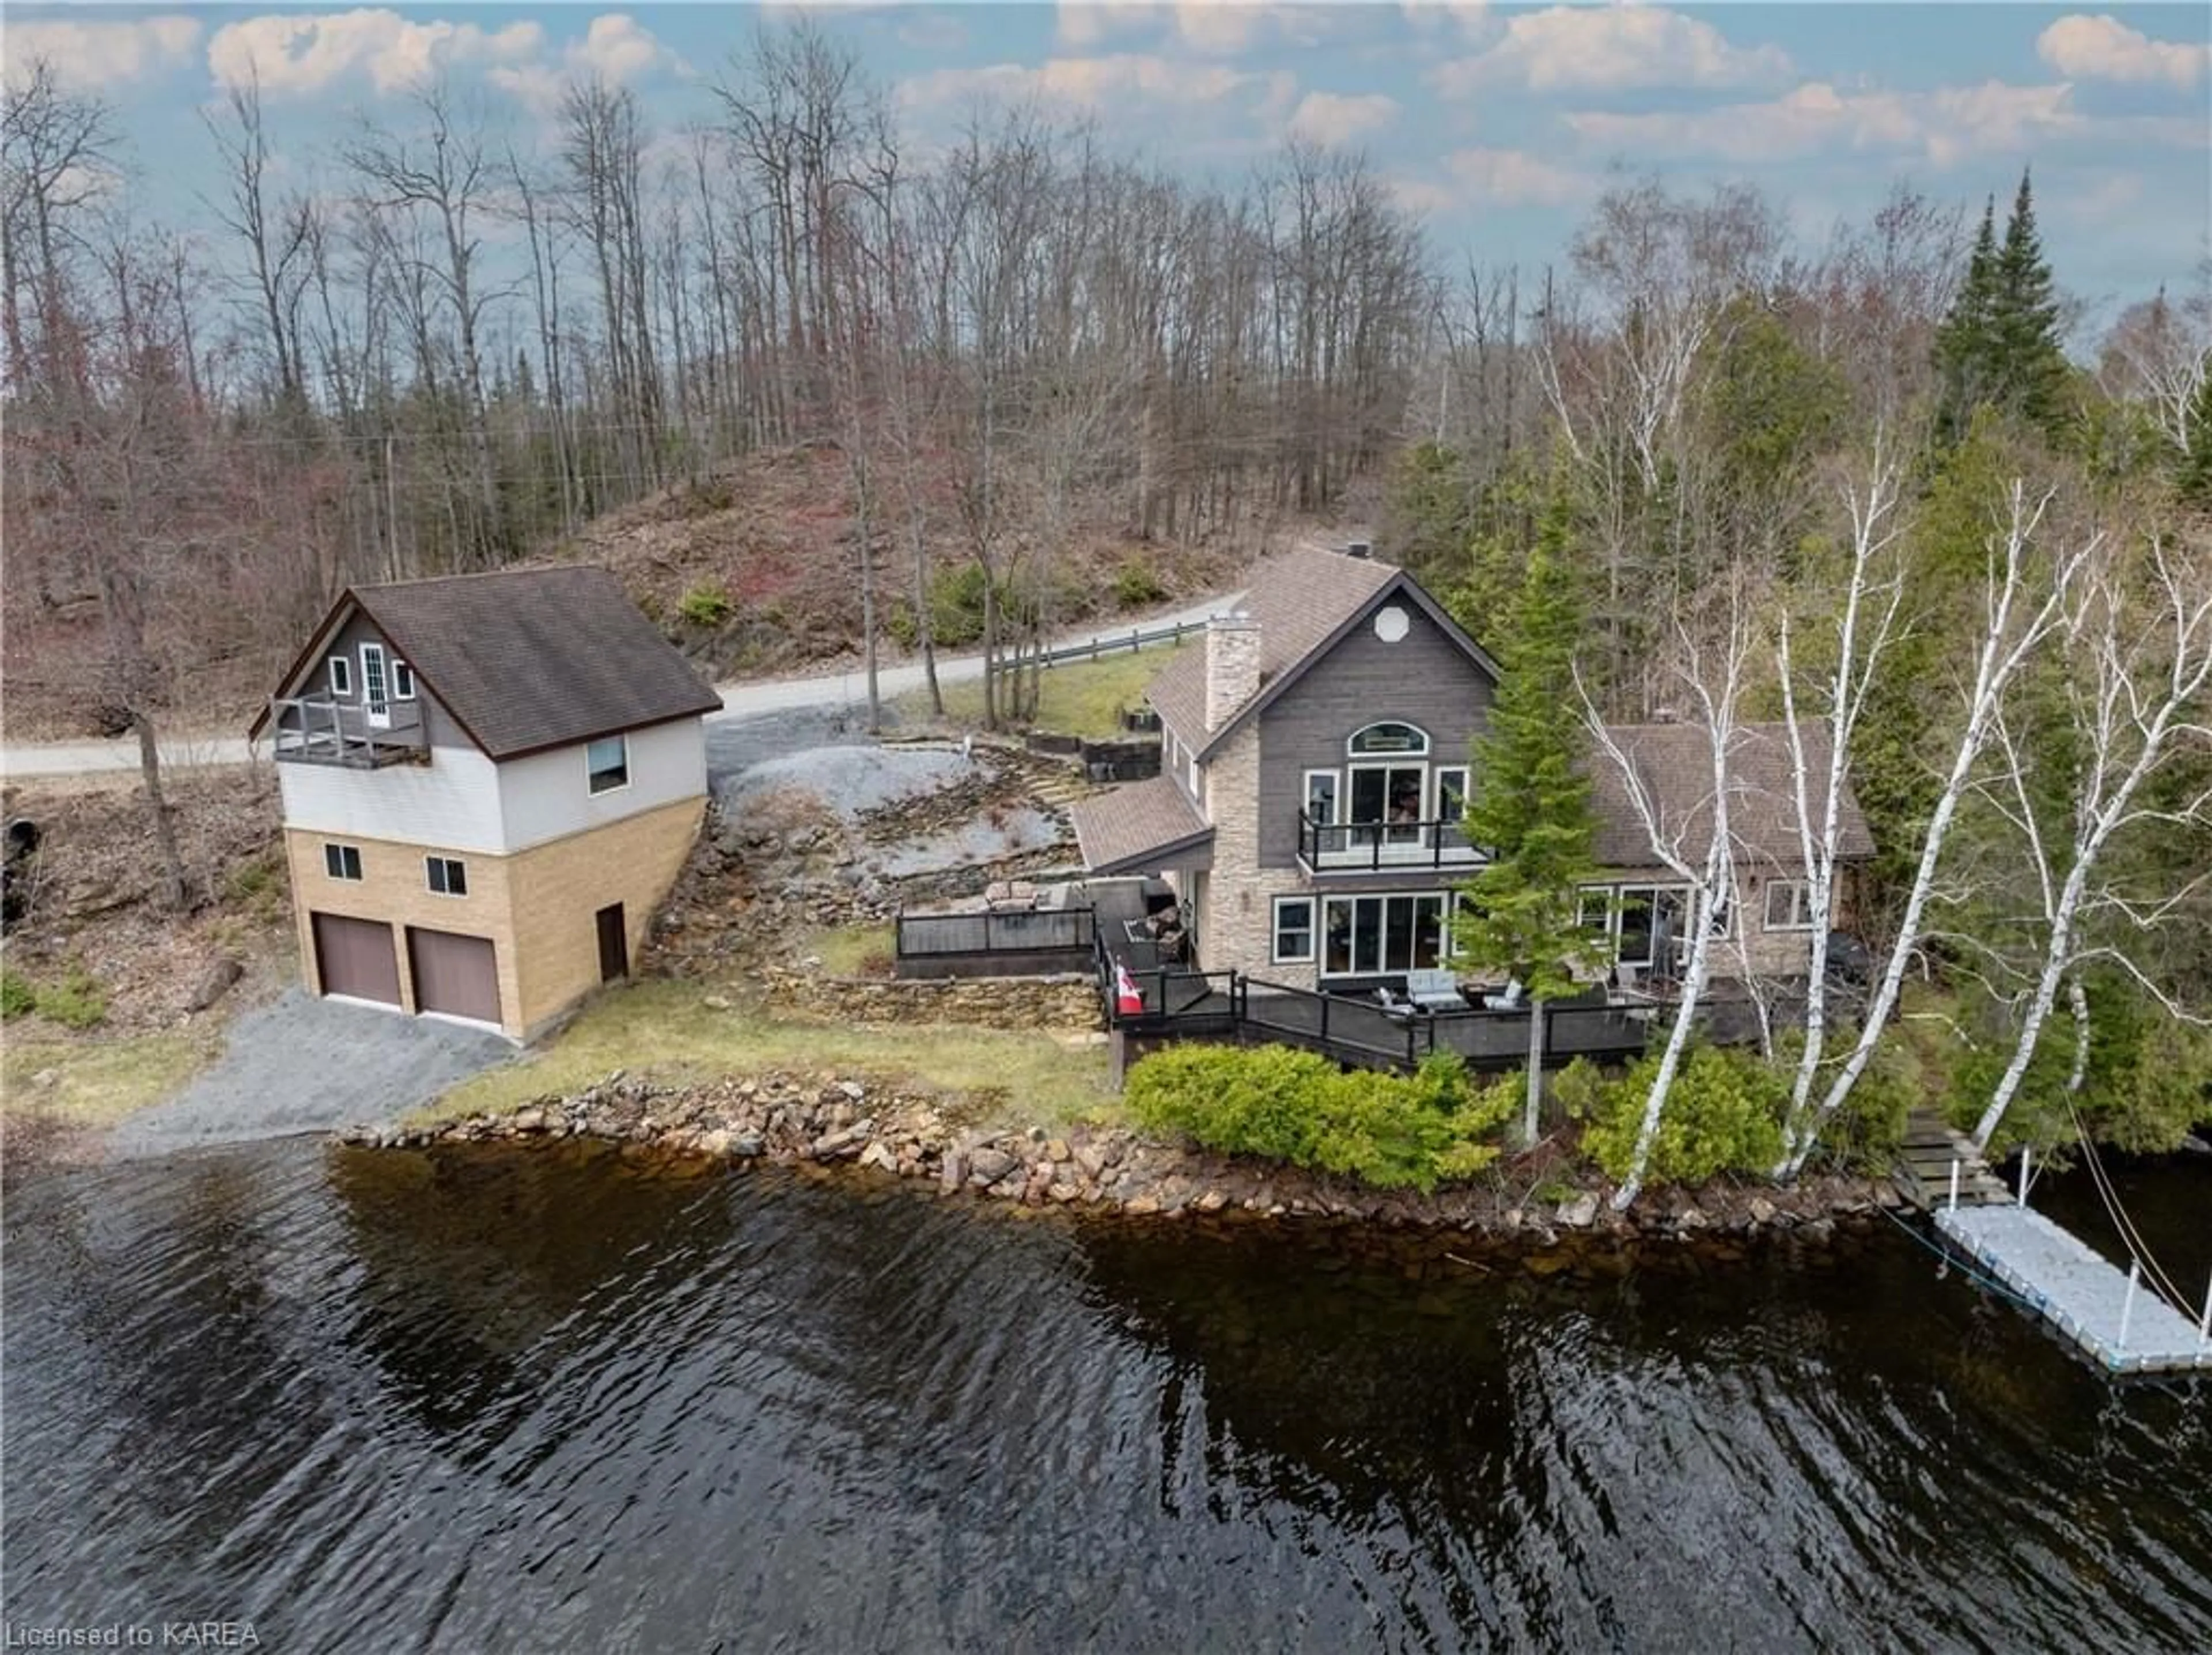 Cottage for 2000 Brewer Rd, Sharbot Lake Ontario K0H 2P0